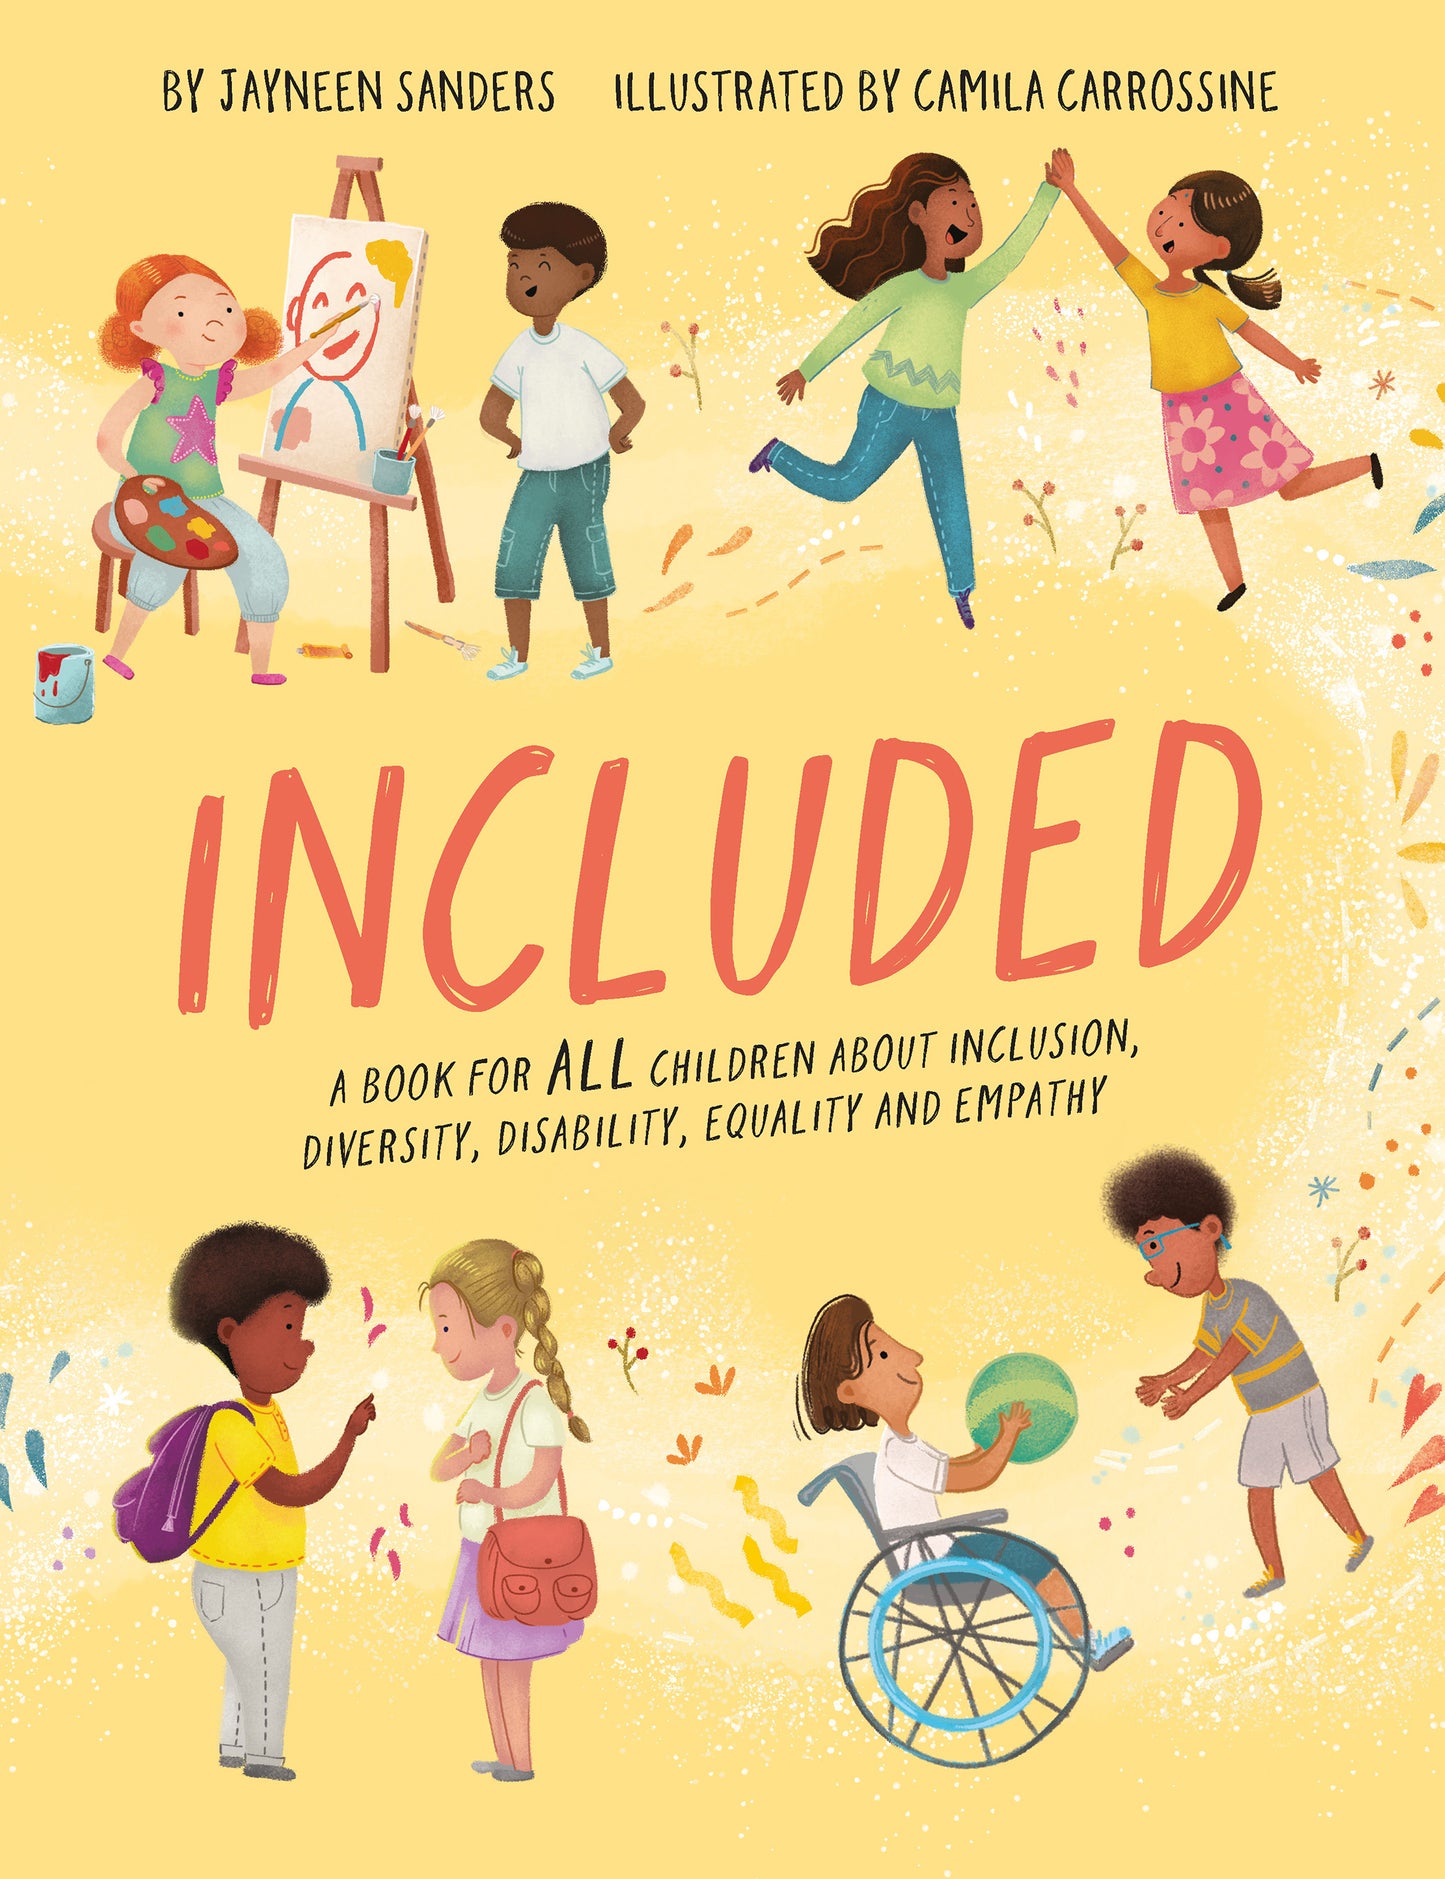 The cover of the book ‘Included’ by Jayneen Sanders.